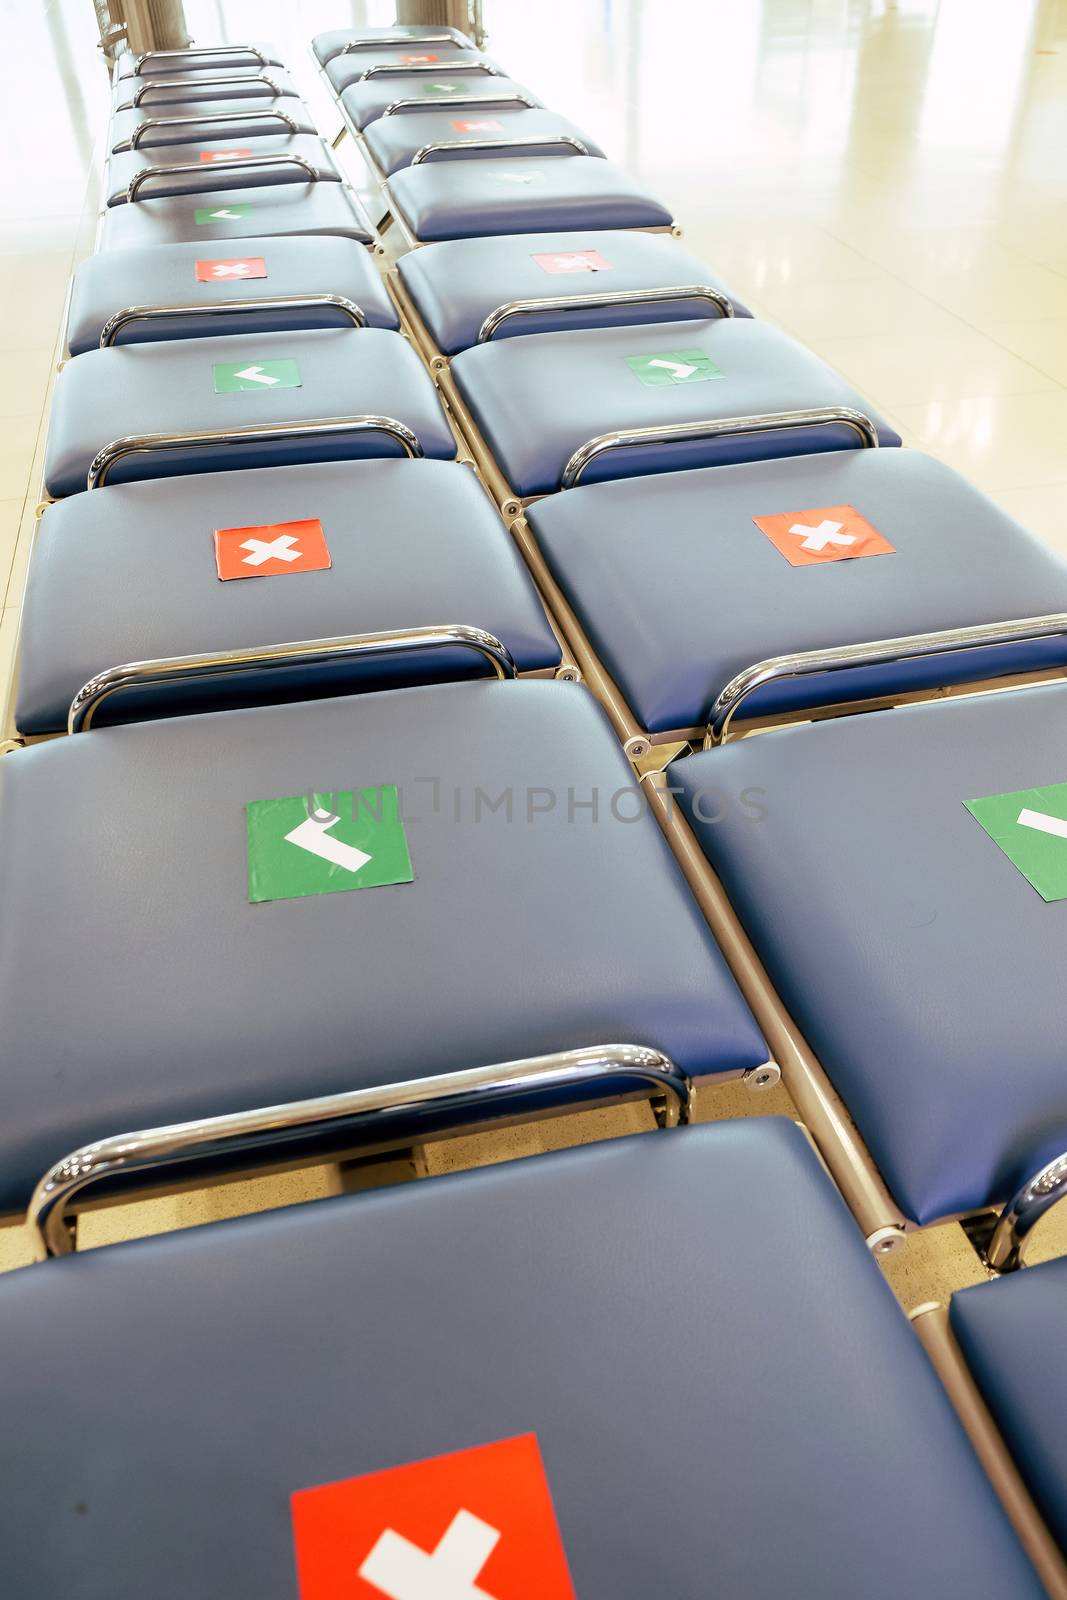 Social distancing, Rows of empty chairs in an airport's departure area marked with symbols regarding social distancing protocol to prevent the spreading of novel corona virus, COVID-19 in Thailand